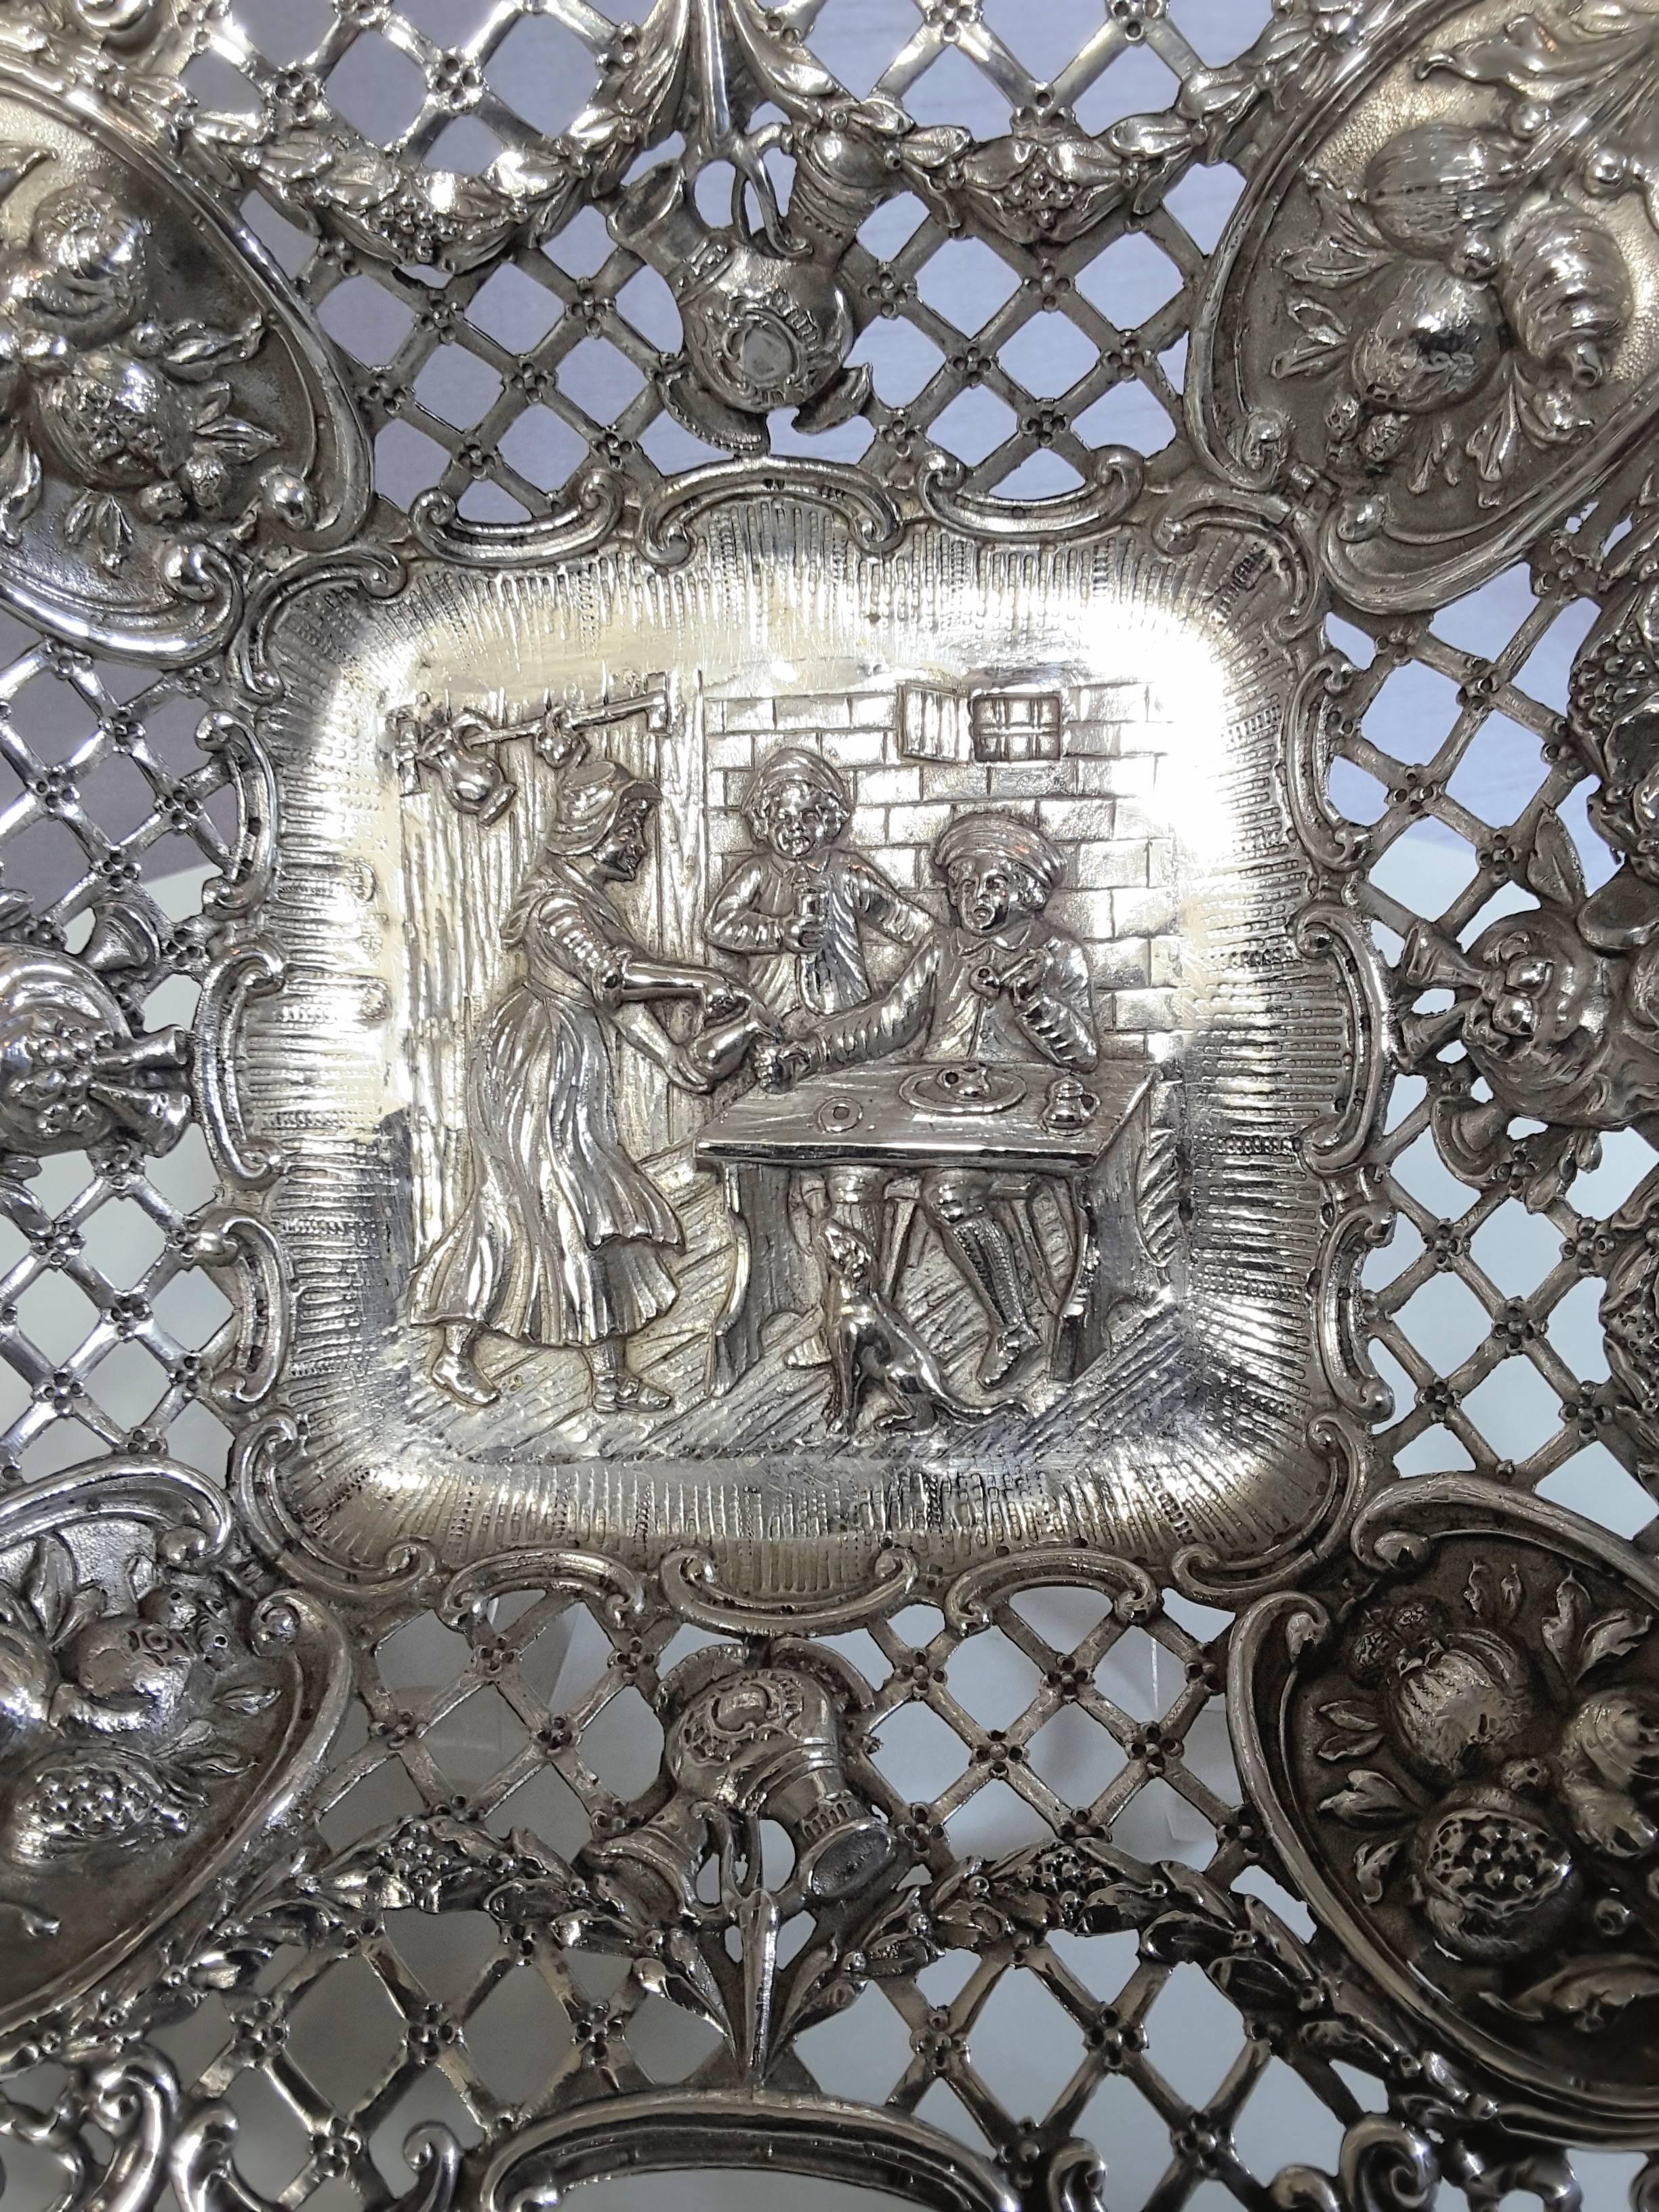 Dutch scene sterling silver pierced bowl, Hanau, Germany, makers mark GR in a heart cartouche, for George Roth, 1891-1919, The dish is scalloped shaped around the sides pierced and decorated with scrolls, vines, horns and four fruit bearing branches